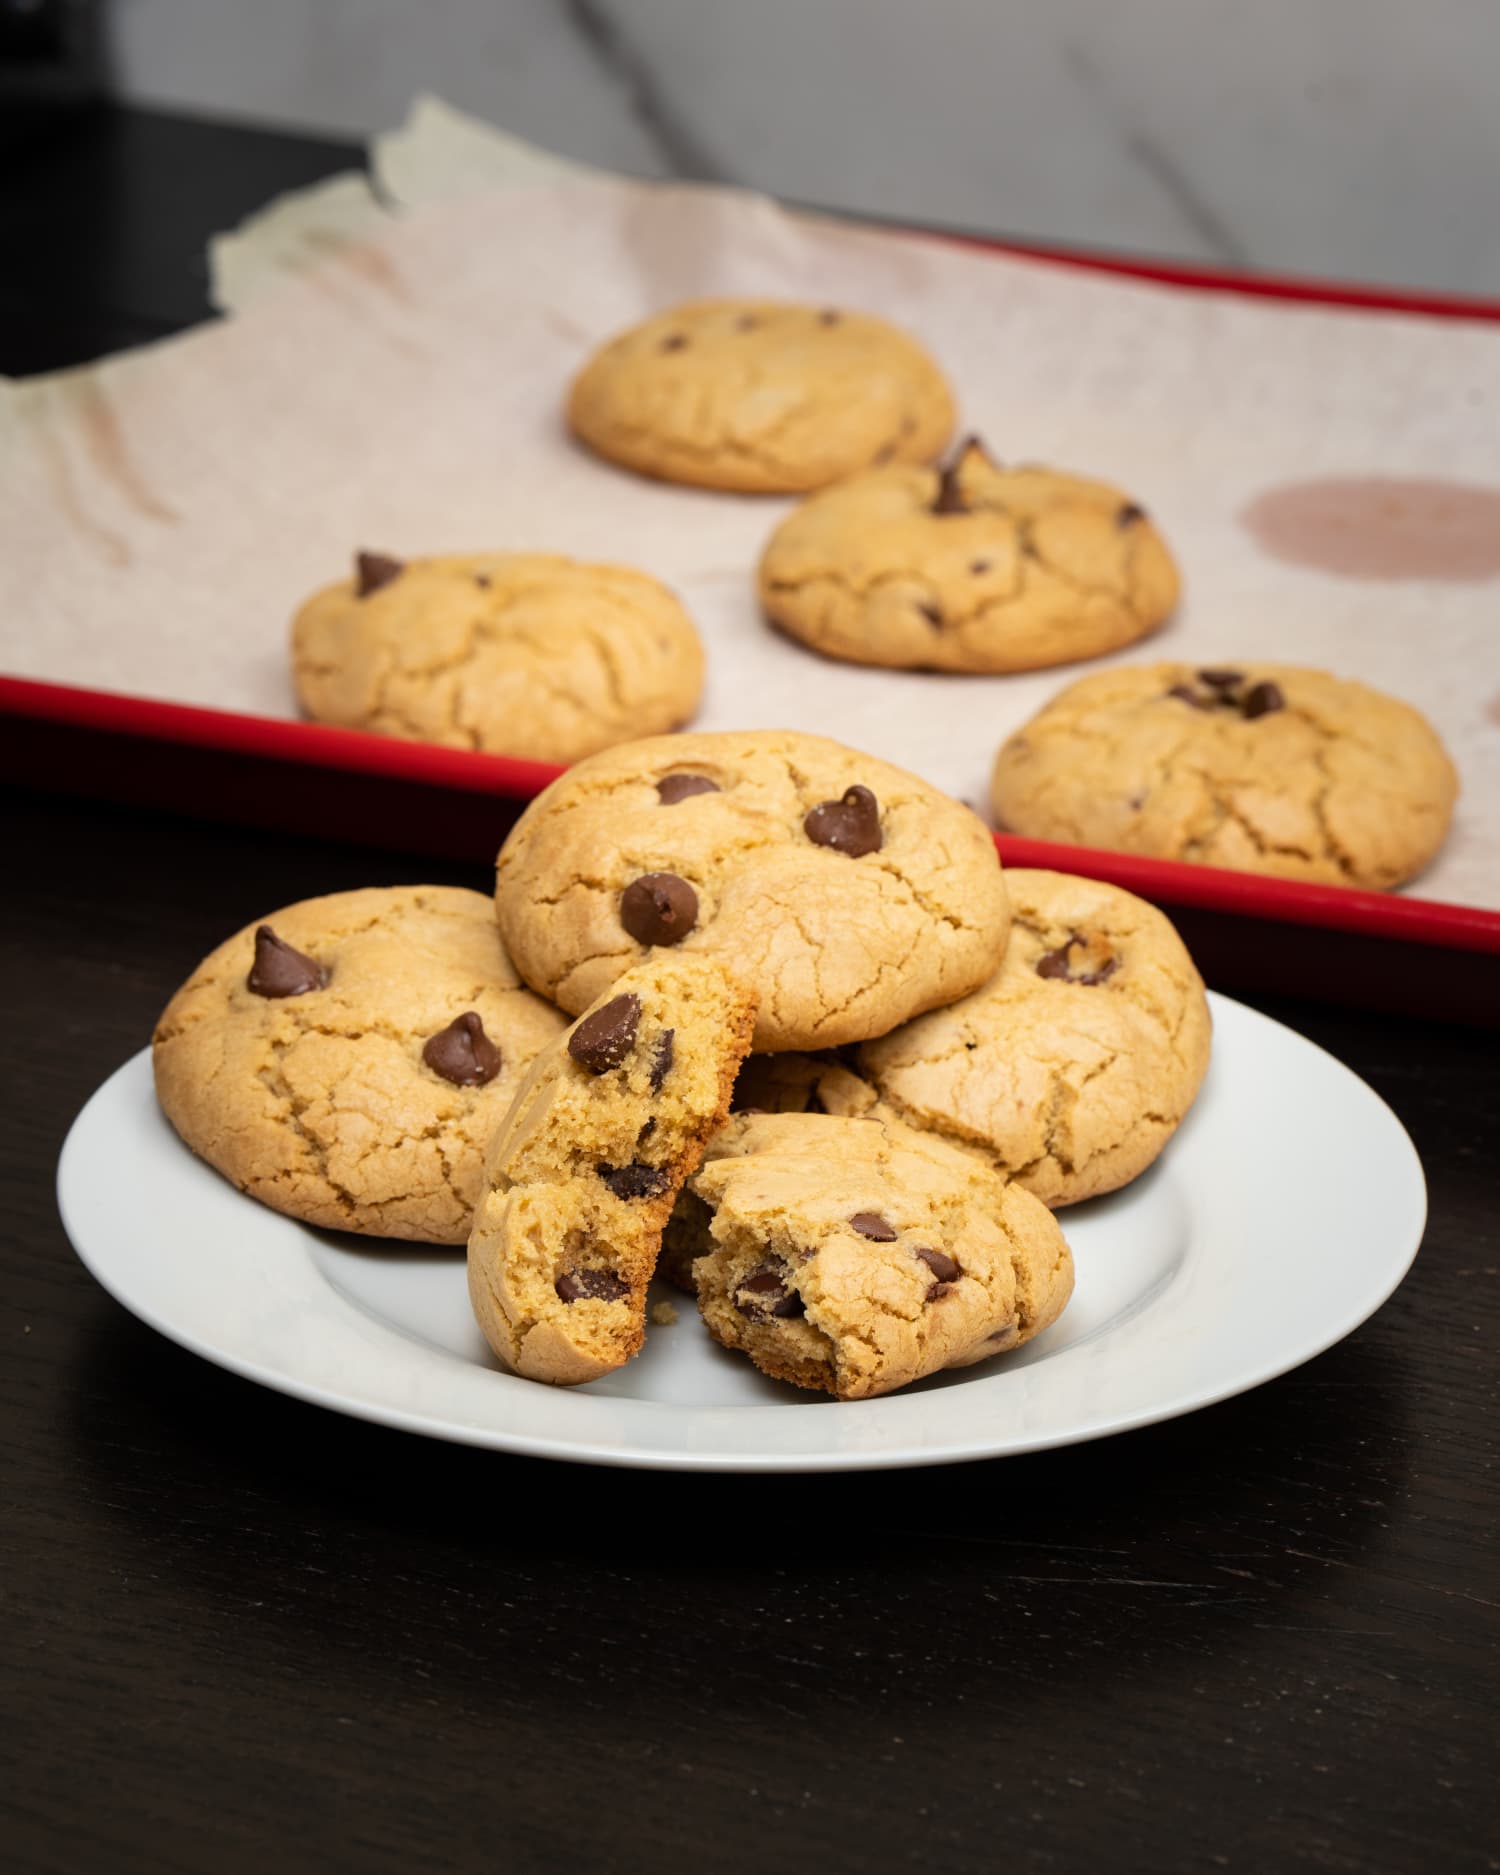 I Tried Olive Oil Chocolate Chunk Cookies and It’s One of the Best Recipes I’ve Tasted